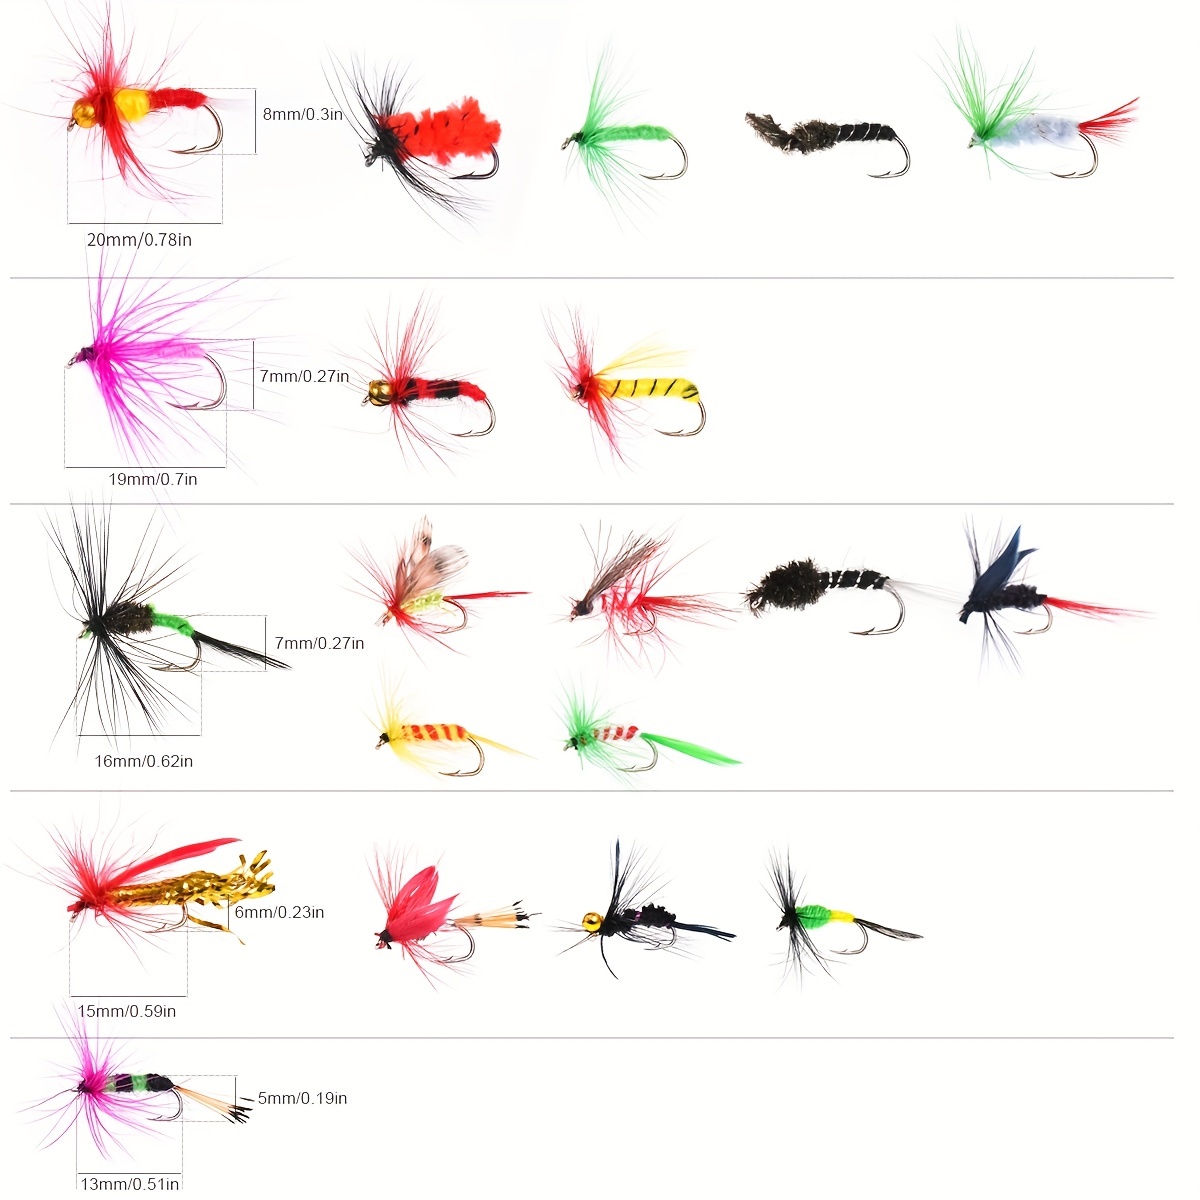 12pc Premium Fly Fishing * Kit - Hand-Tied Lures for Trout, Bass, Salmon -  Effective in Saltwater and Freshwater - Increase Your Catch Rate